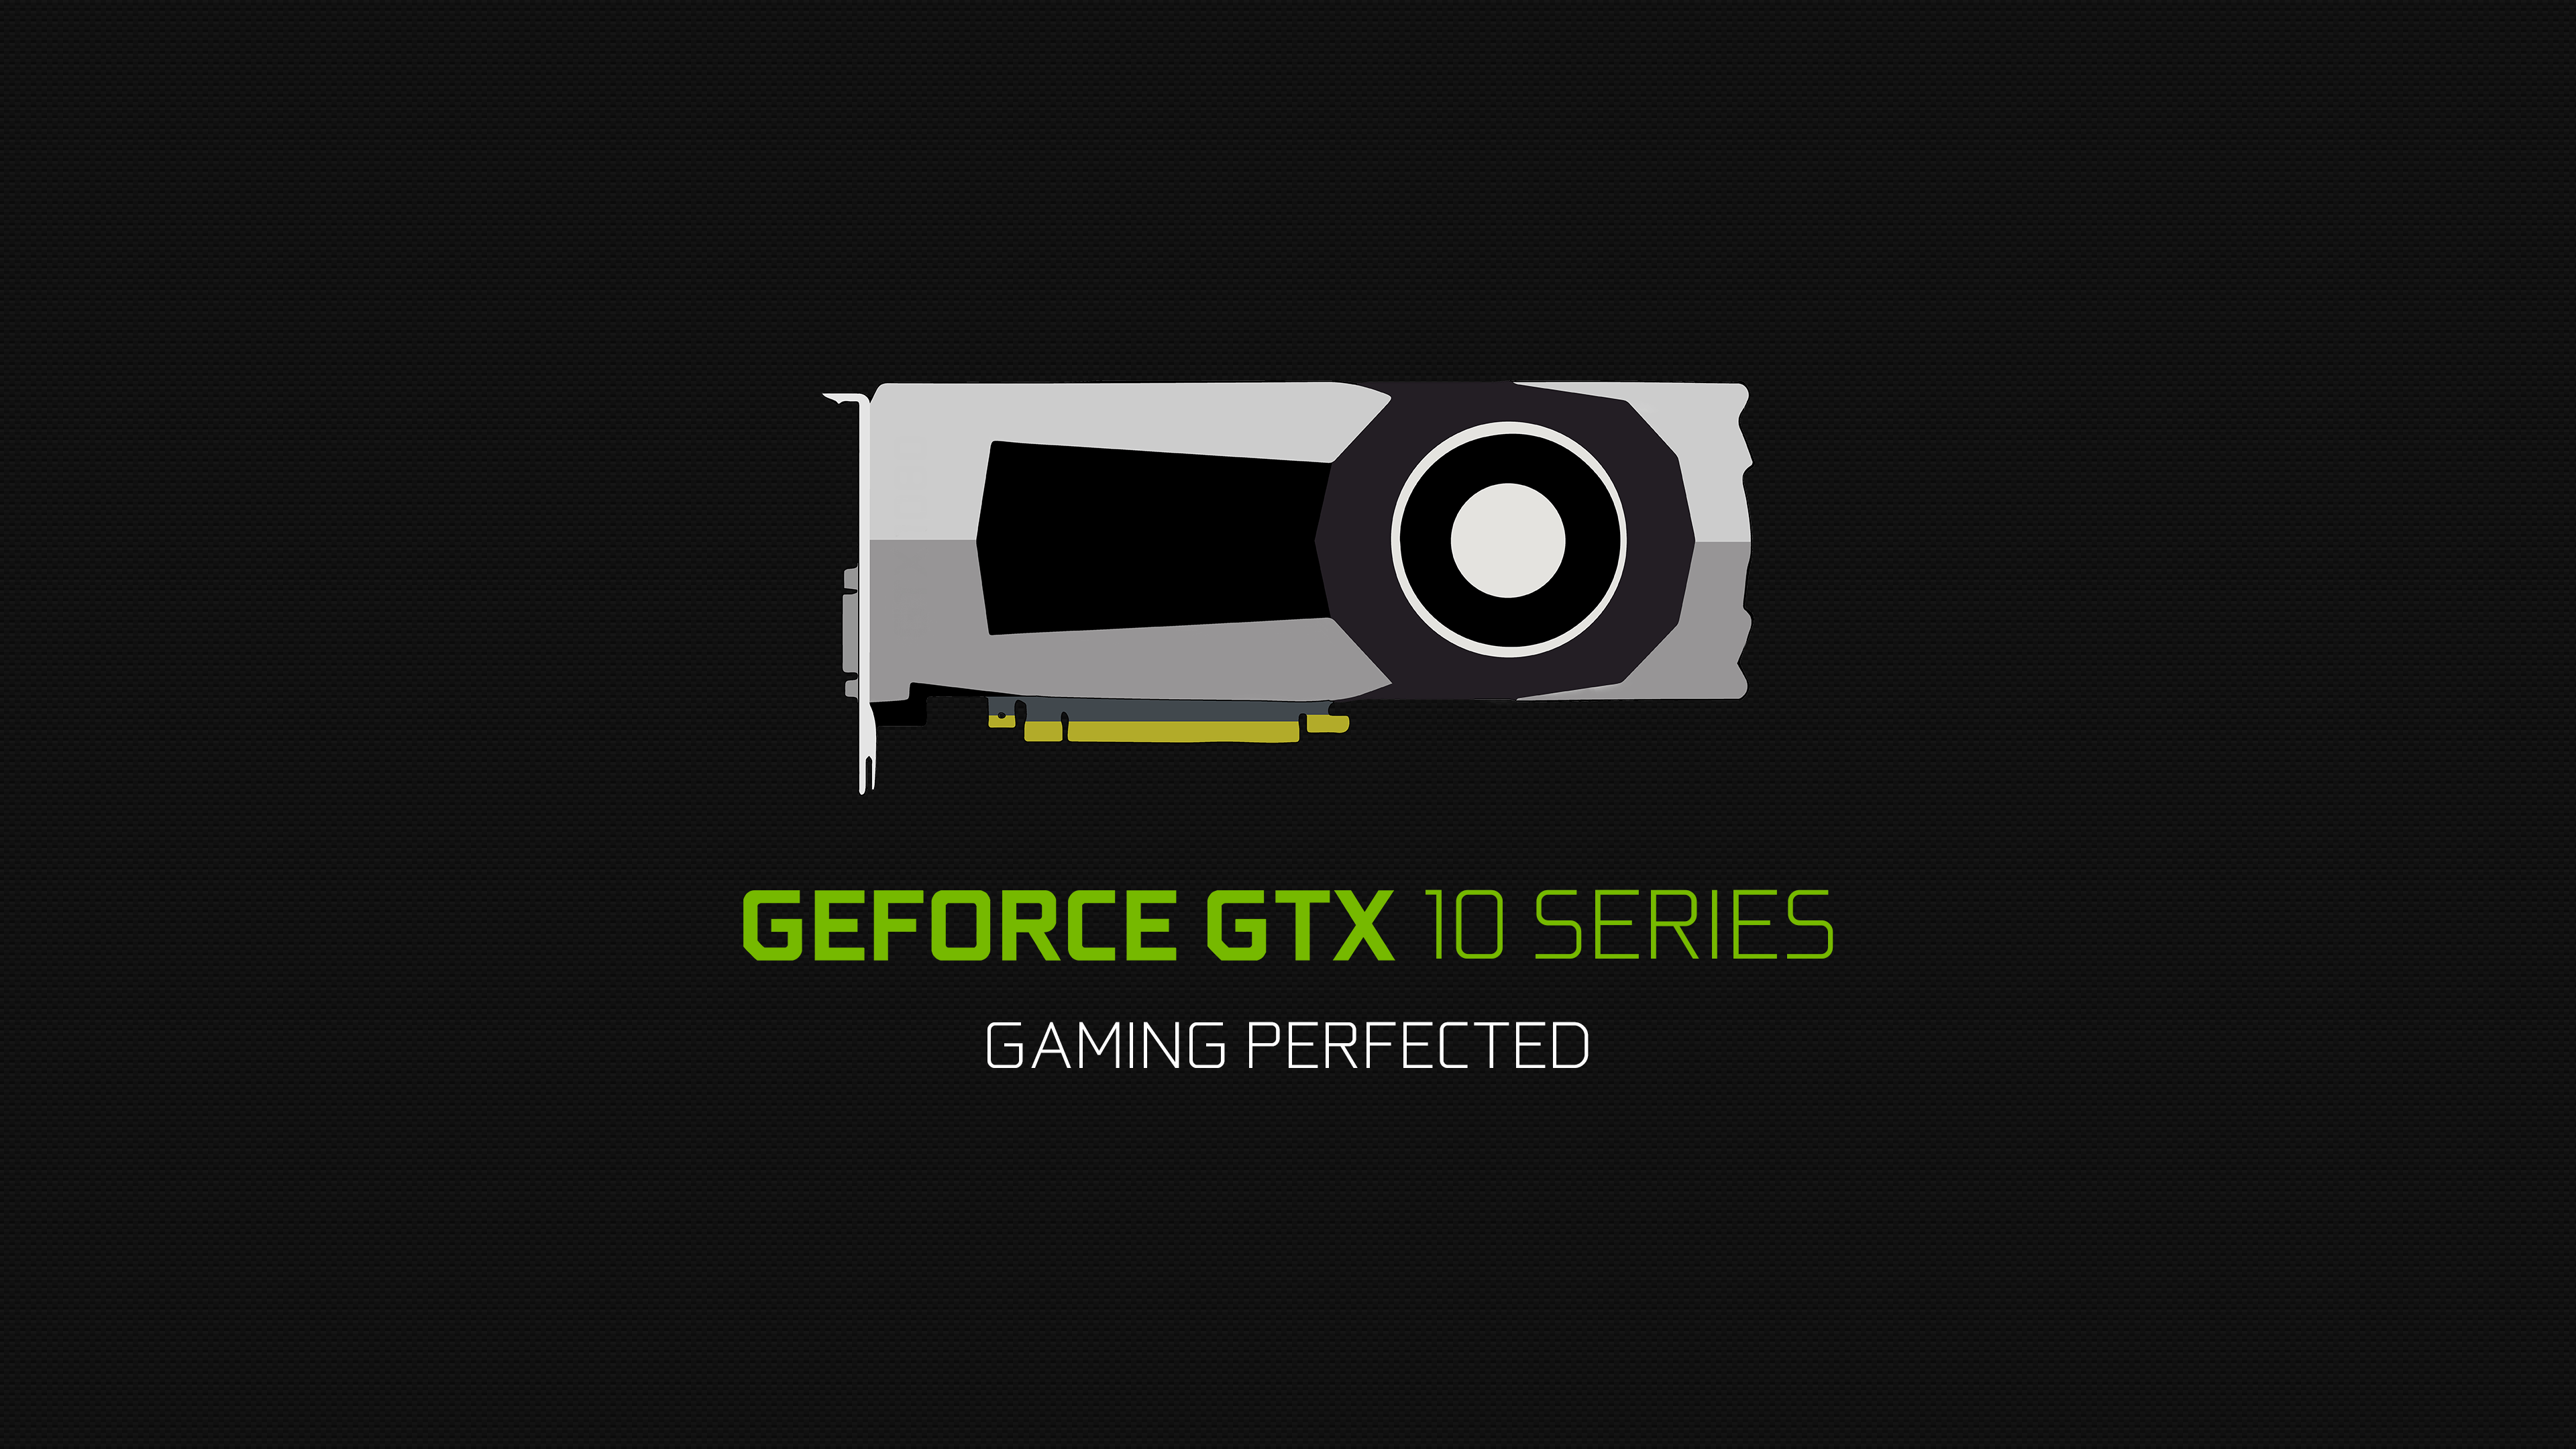 Nvidia HD Wallpaper and Background Image